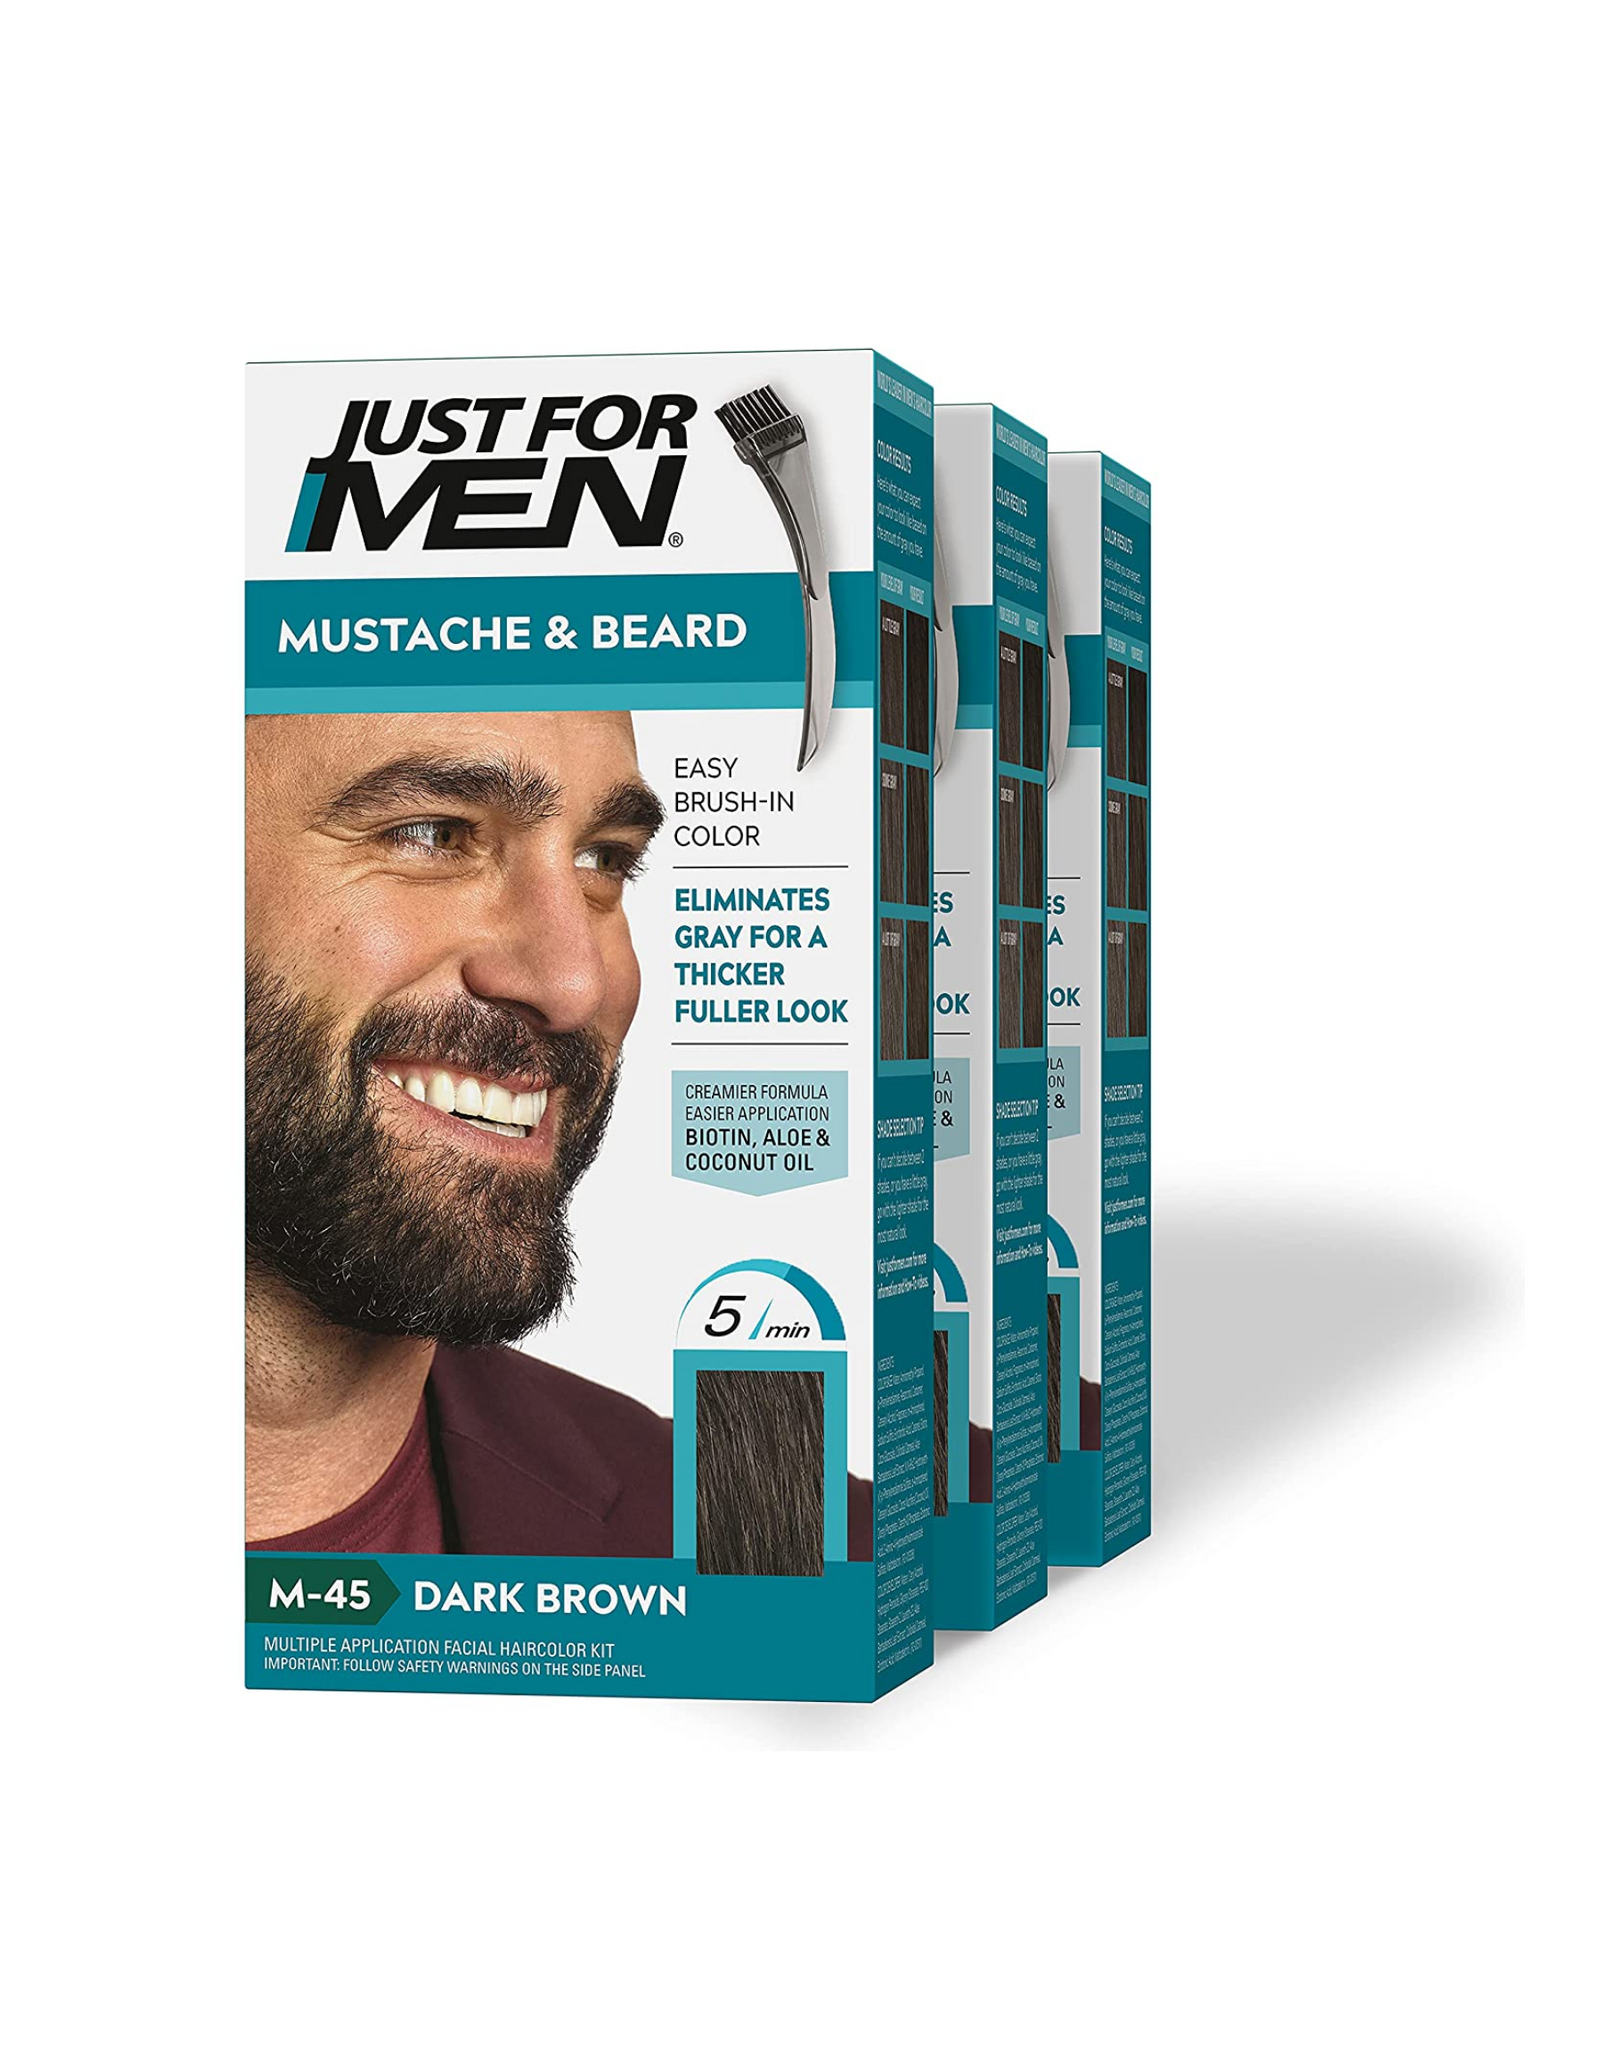 Just for Men Mustache & Beard with Brush, M-45, Dark Brown (Pack of 3)